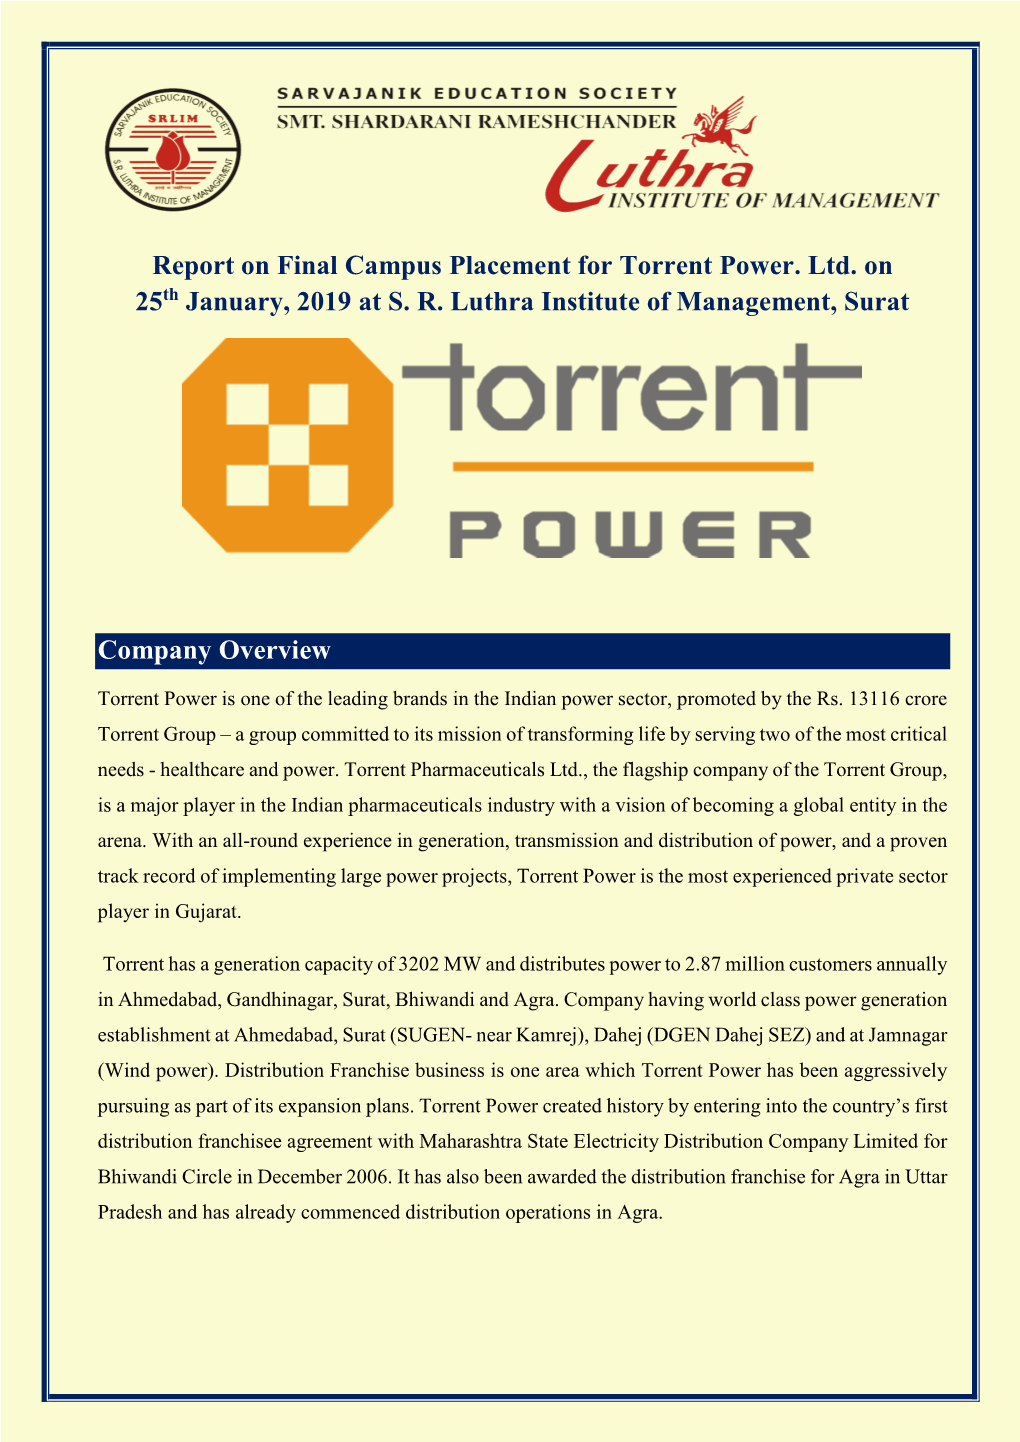 Report on Final Campus Placement for Torrent Power. Ltd. on 25Th January, 2019 at S. R. Luthra Institute of Management, Surat